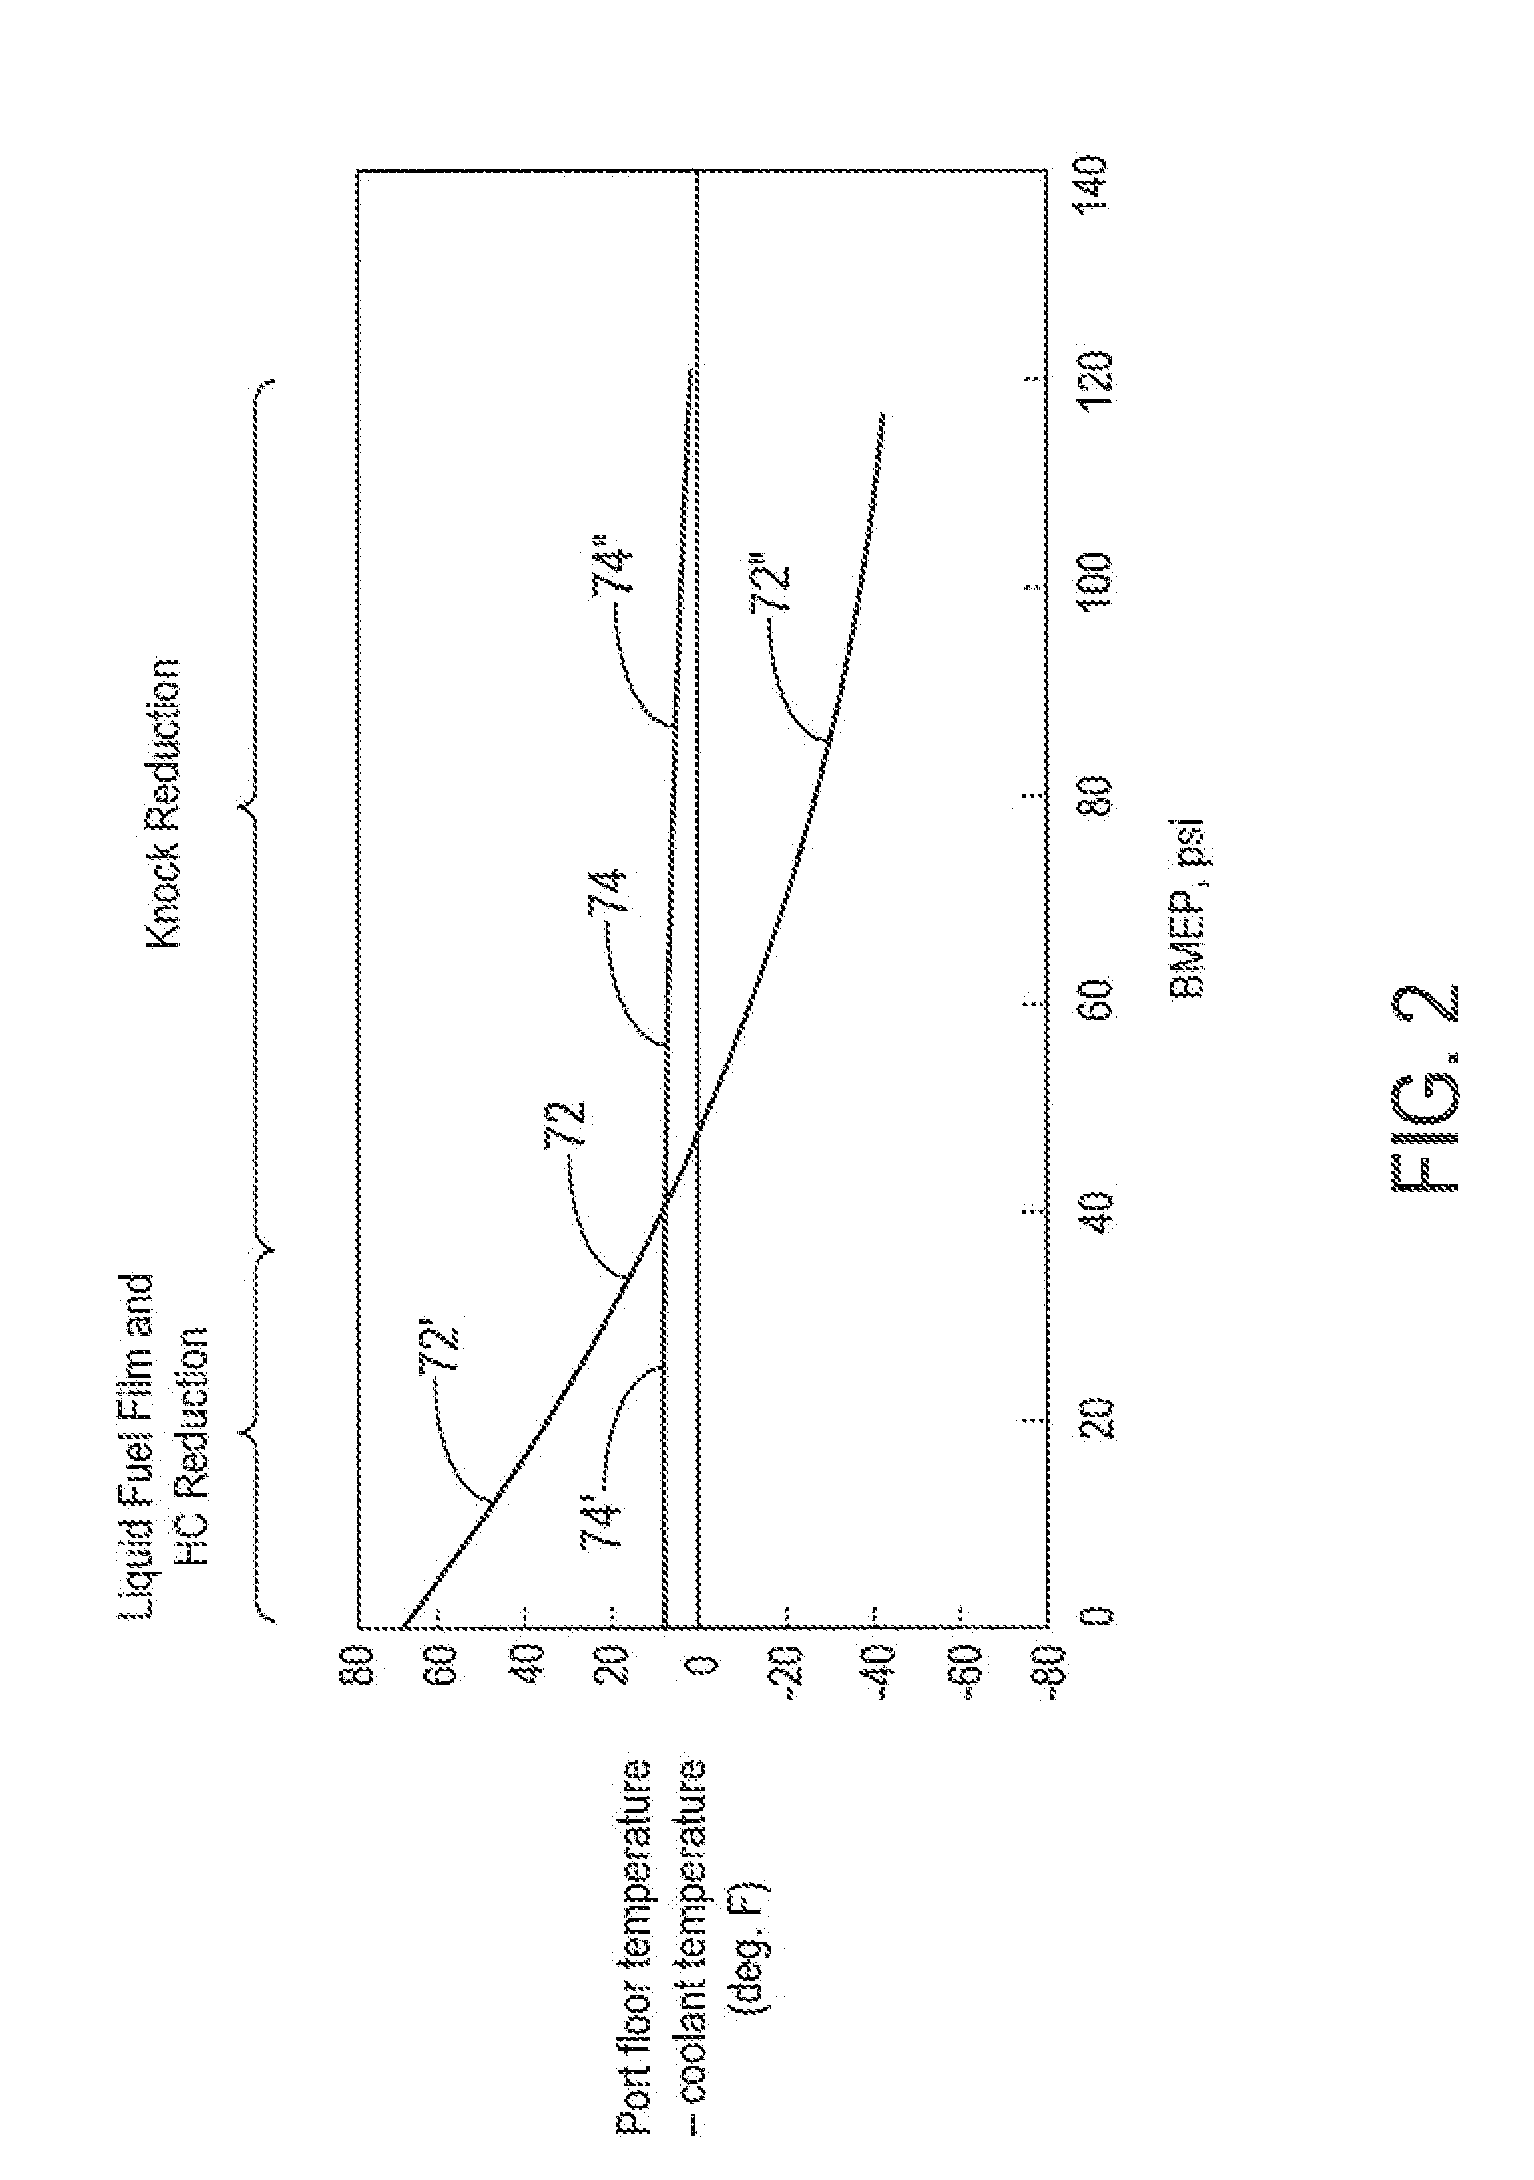 Low-thermal-inertia intake ports for port-injected, spark ignition engines and an associated manufacturing method